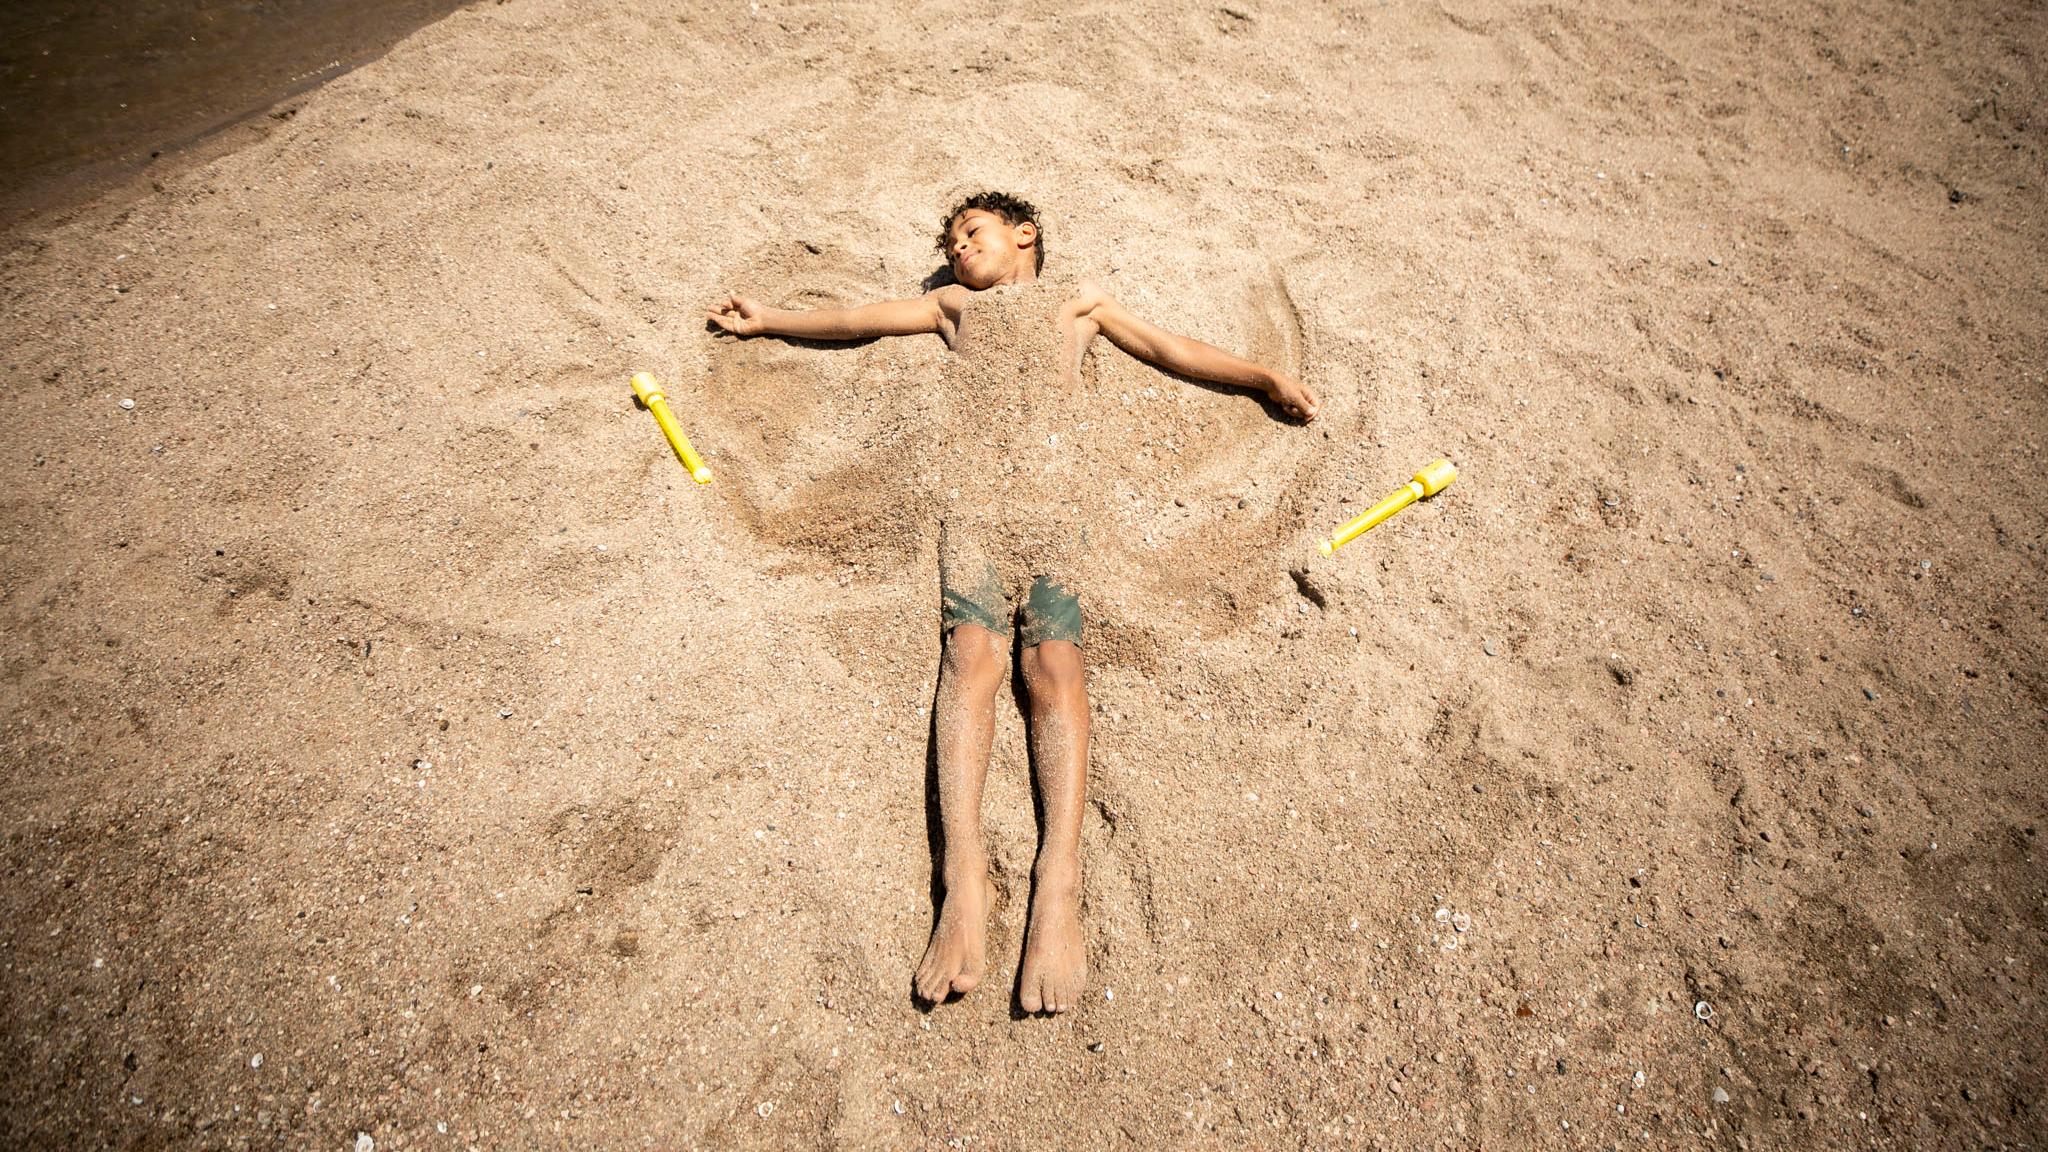 A kid lays in the sand, covered by the sand, with his arms stretched out as if it were winter and he was making a snow angel.